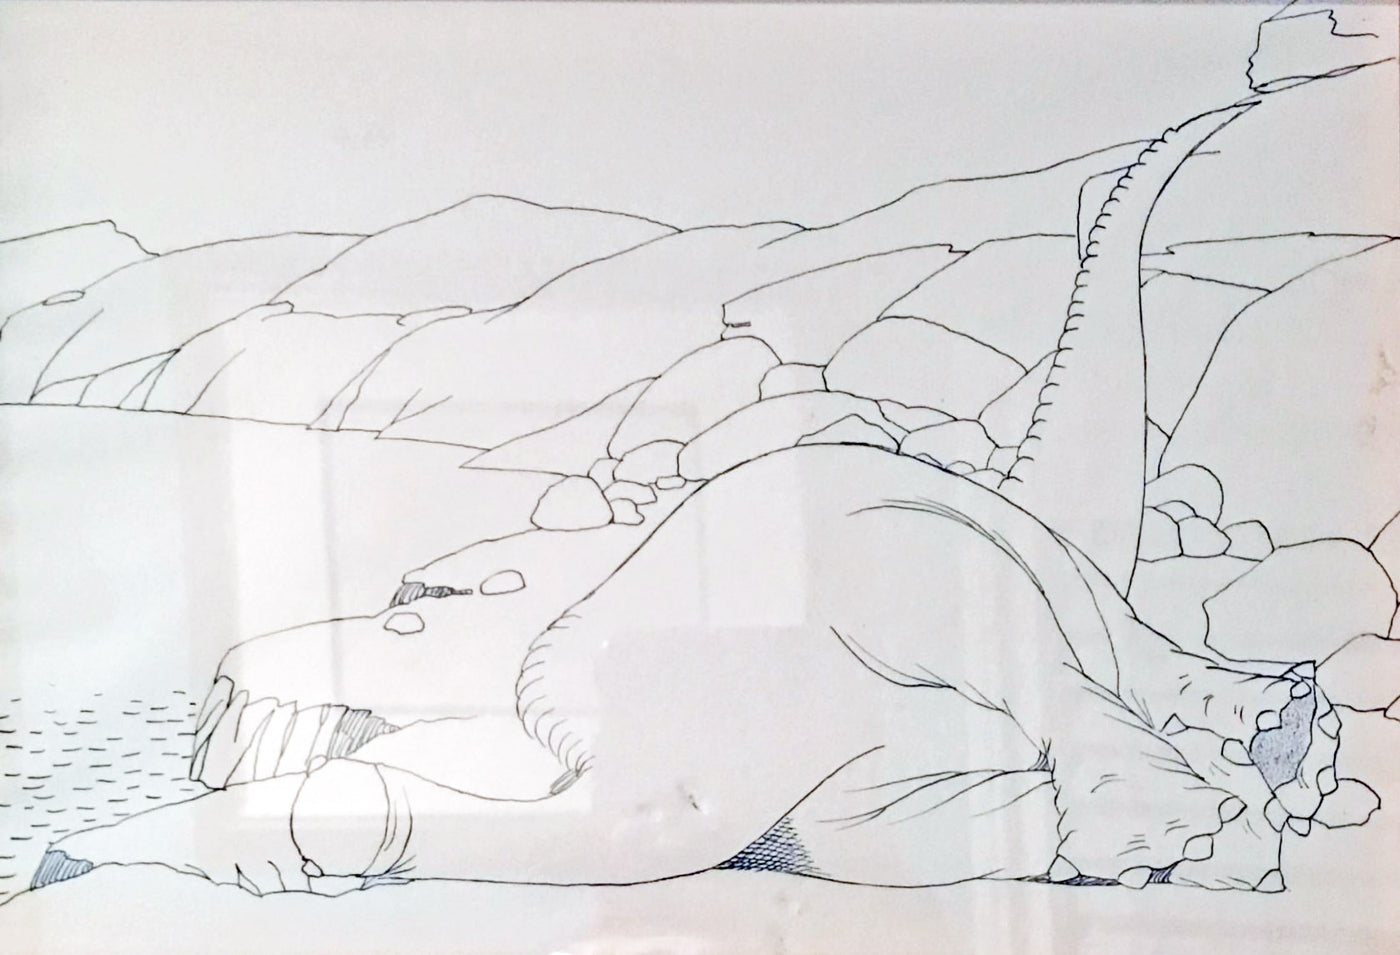 Original Production Drawing of Gertie the Dinosaur by Windsor McCay (1914)